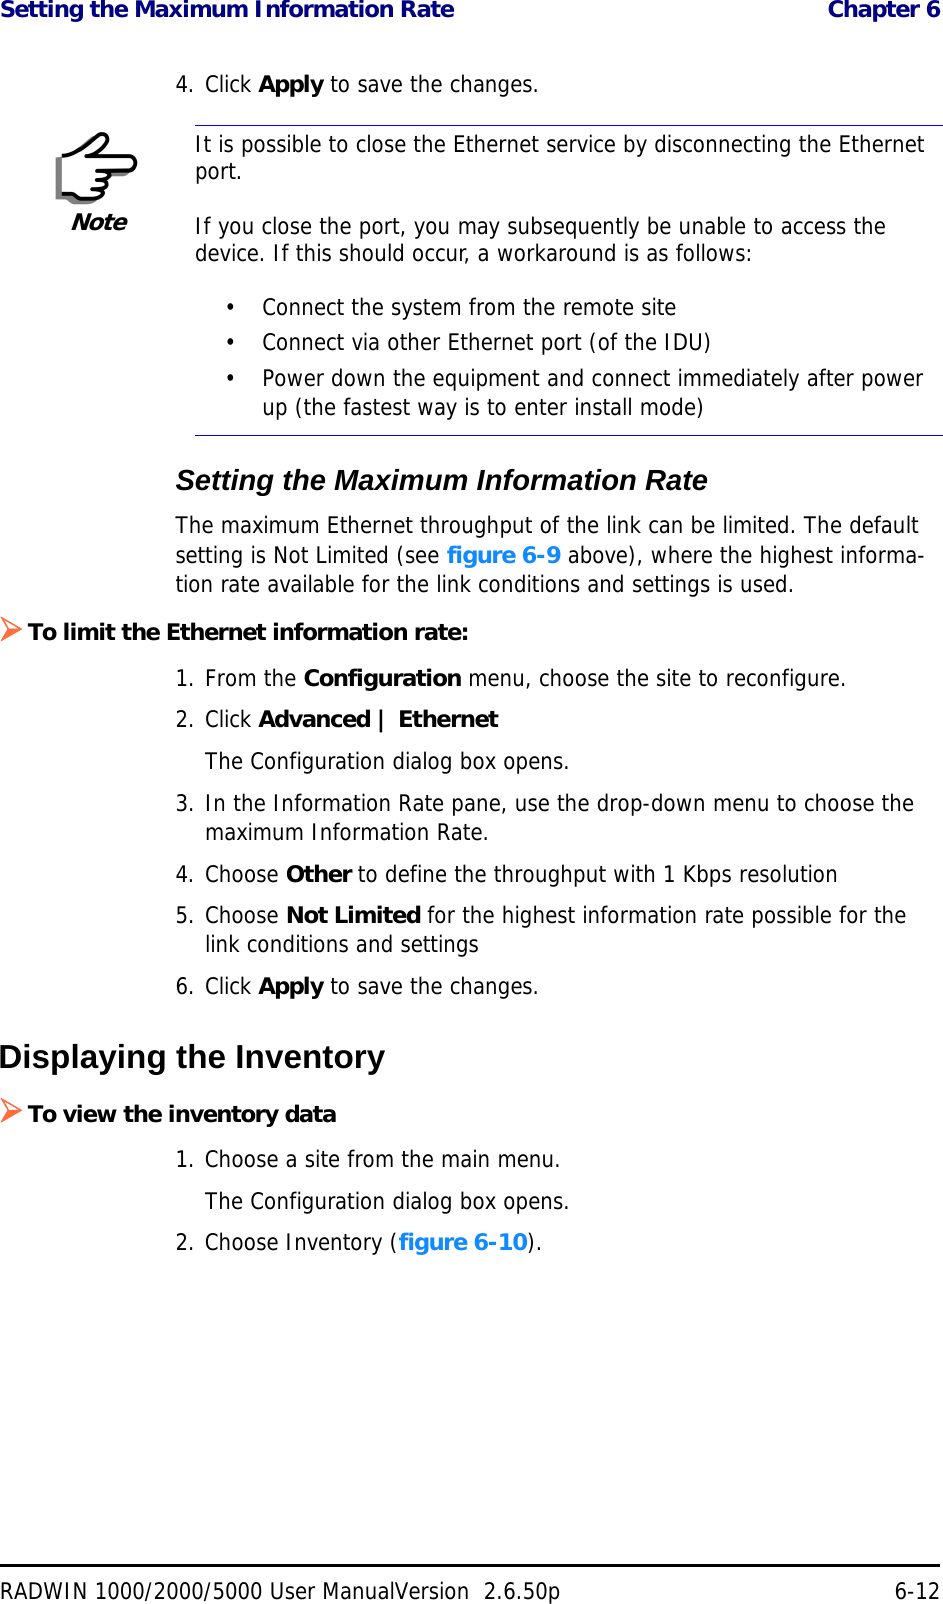 Setting the Maximum Information Rate  Chapter 6RADWIN 1000/2000/5000 User ManualVersion  2.6.50p 6-124. Click Apply to save the changes.Setting the Maximum Information RateThe maximum Ethernet throughput of the link can be limited. The default setting is Not Limited (see figure 6-9 above), where the highest informa-tion rate available for the link conditions and settings is used.To limit the Ethernet information rate:1. From the Configuration menu, choose the site to reconfigure.2. Click Advanced | EthernetThe Configuration dialog box opens.3. In the Information Rate pane, use the drop-down menu to choose the maximum Information Rate.4. Choose Other to define the throughput with 1 Kbps resolution5. Choose Not Limited for the highest information rate possible for the link conditions and settings6. Click Apply to save the changes.Displaying the InventoryTo view the inventory data1. Choose a site from the main menu.The Configuration dialog box opens.2. Choose Inventory (figure 6-10).NoteIt is possible to close the Ethernet service by disconnecting the Ethernet port.If you close the port, you may subsequently be unable to access the device. If this should occur, a workaround is as follows:• Connect the system from the remote site• Connect via other Ethernet port (of the IDU)• Power down the equipment and connect immediately after power up (the fastest way is to enter install mode)